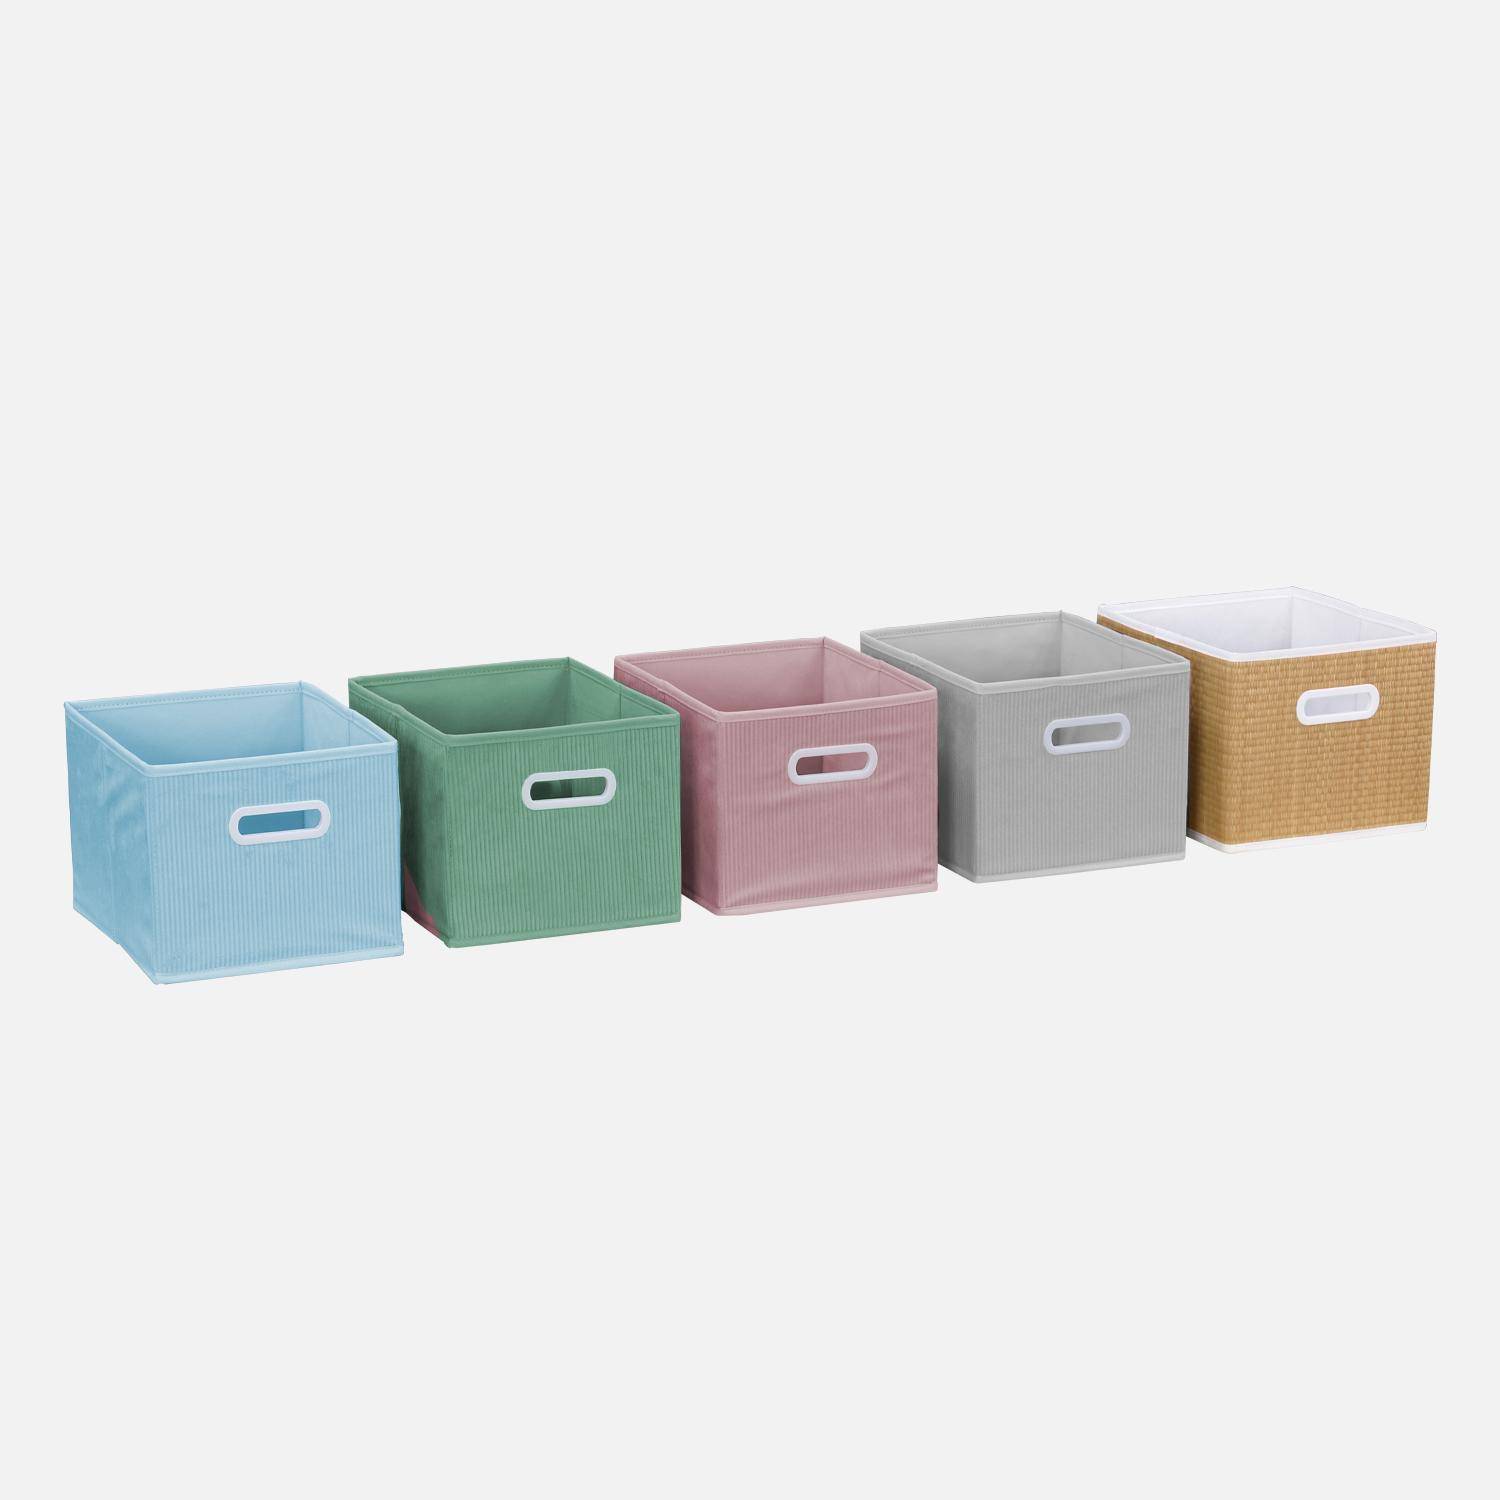 Storage unit for children with 7 compartments and 2 blue and 2 grey velvet baskets Photo4